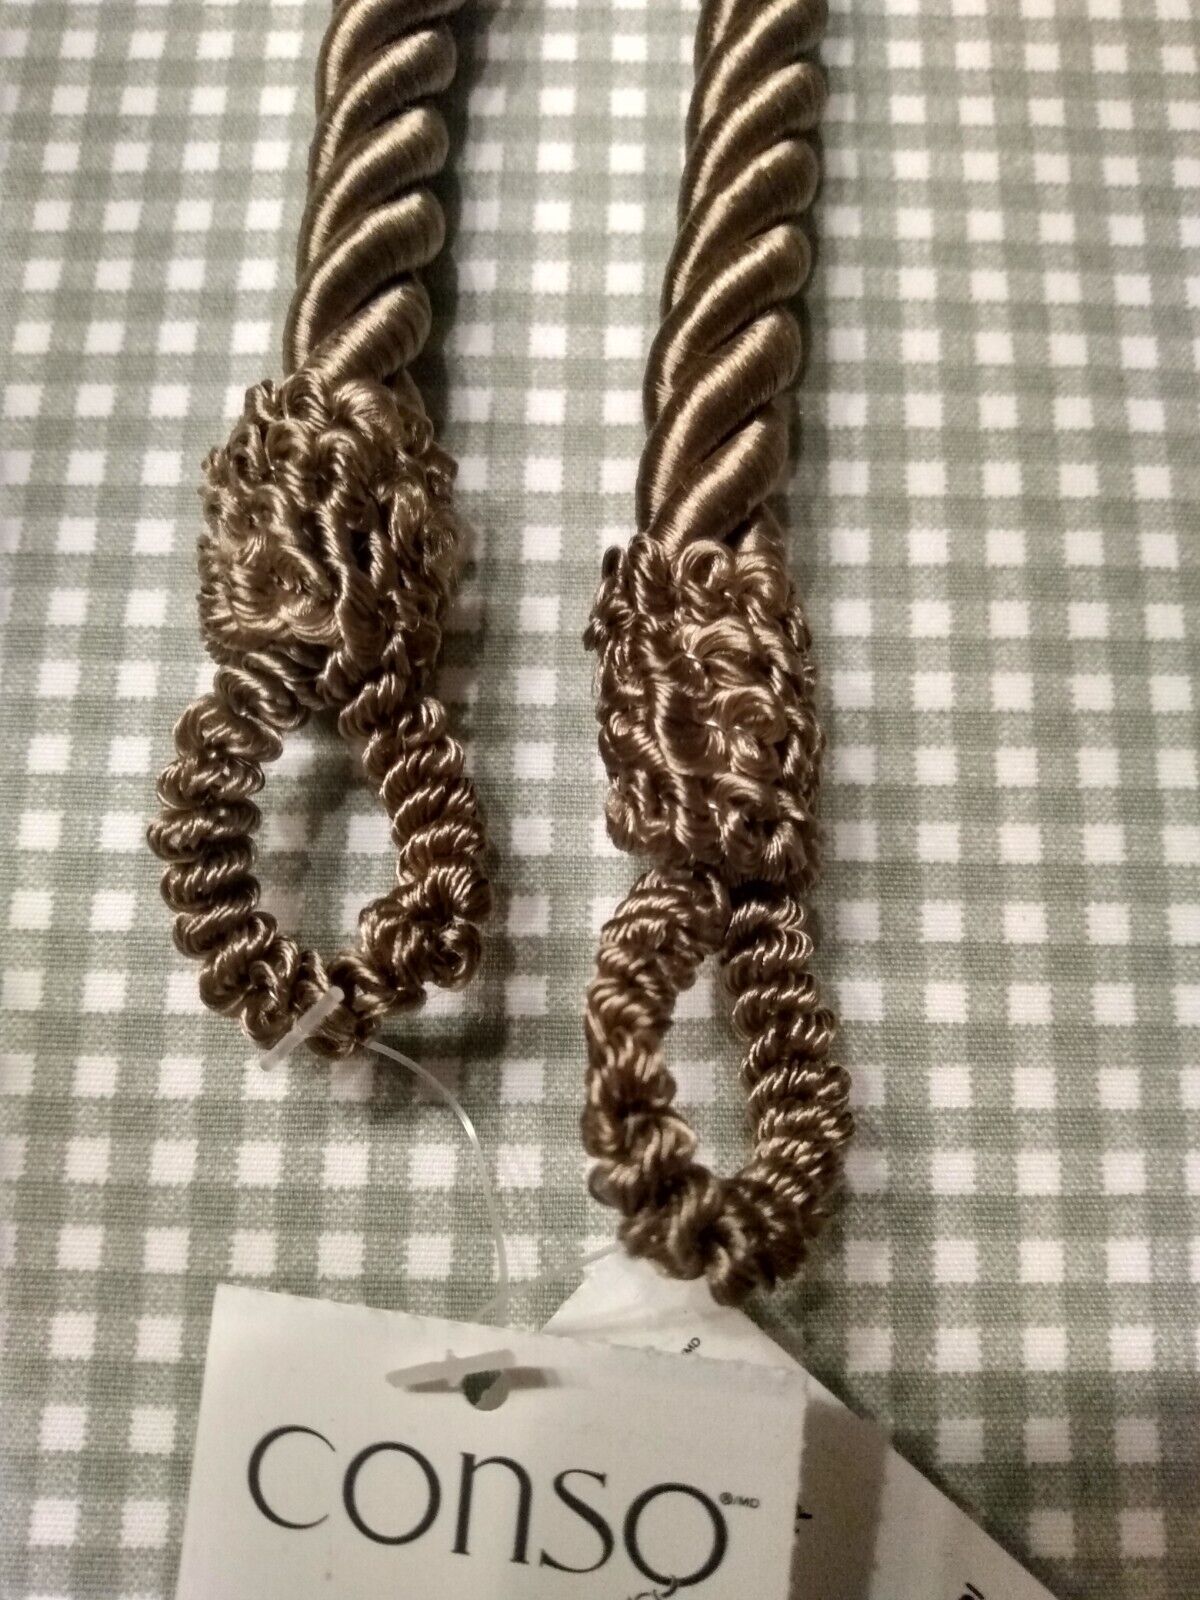 Curtain Tiebacks Drapery Conso Twisted Cord 22 Inches Lot of 2 Bronze Brown New Conso na - фотография #4